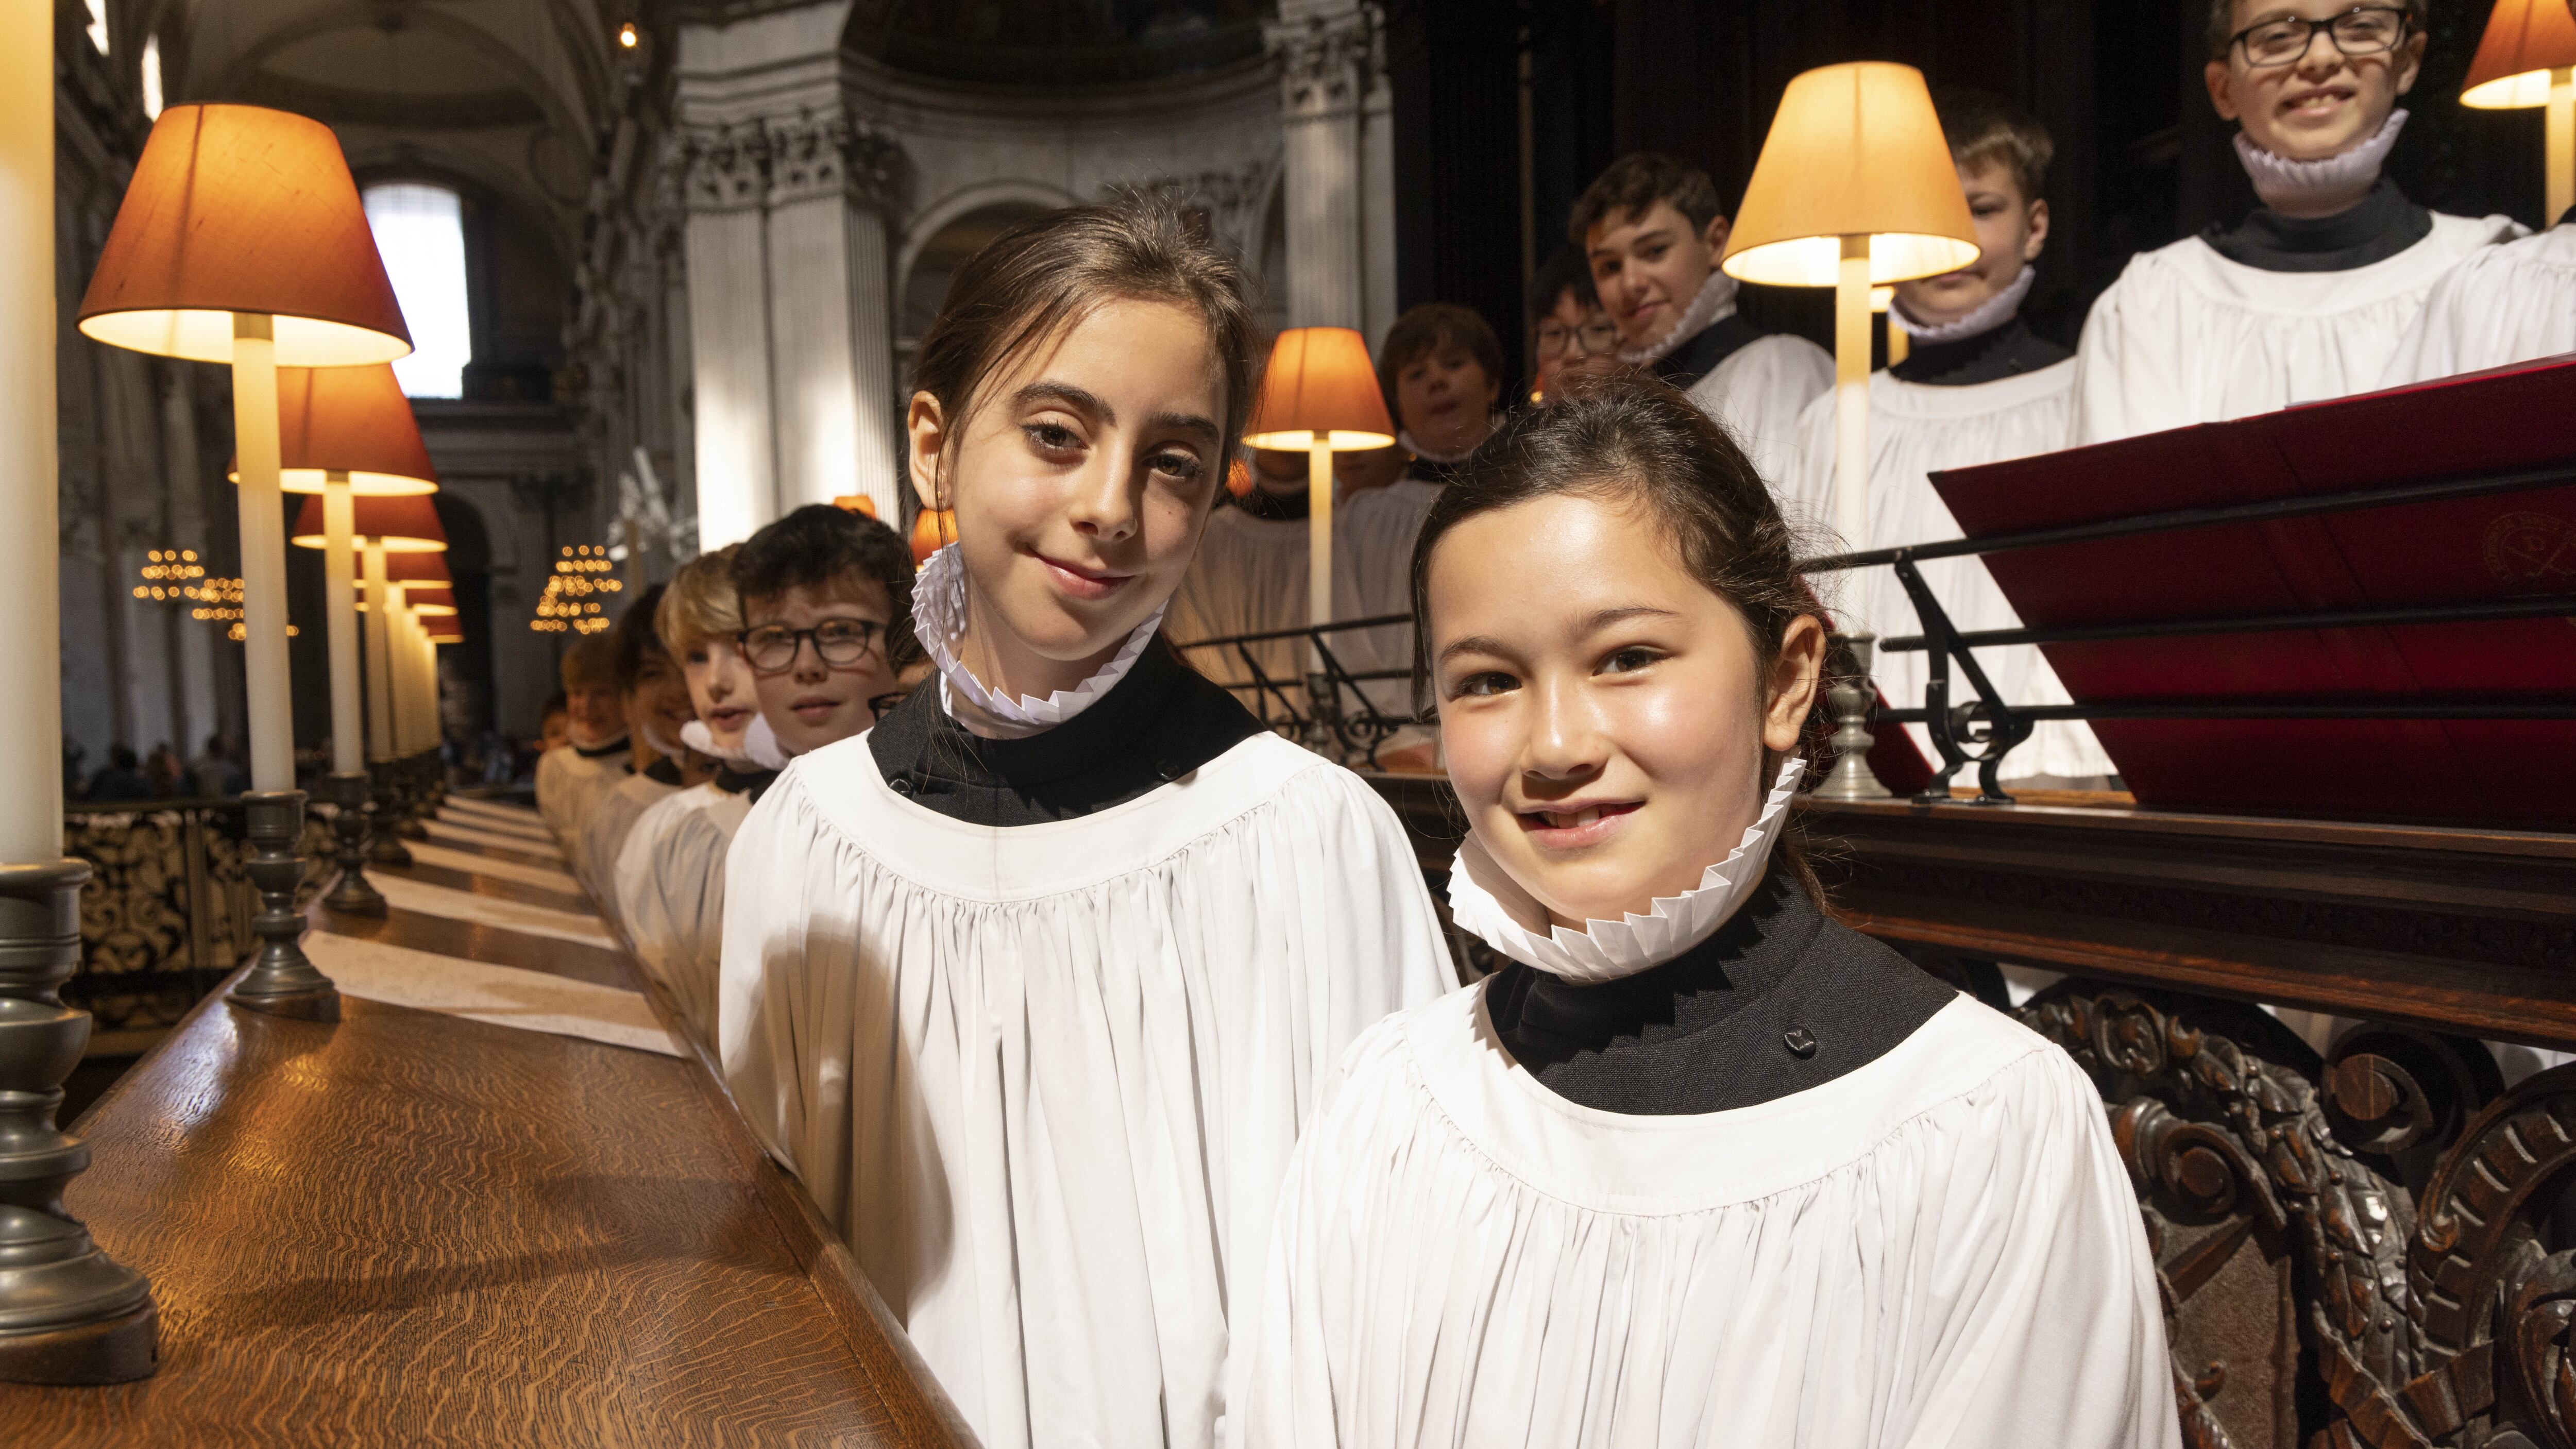 Choristers Lila, 11 and Lois (right), 10, at St Paul’s Cathedral in London, as for the first time girl choristers will formally join the St Paul’s Cathedral Choir as full choristers